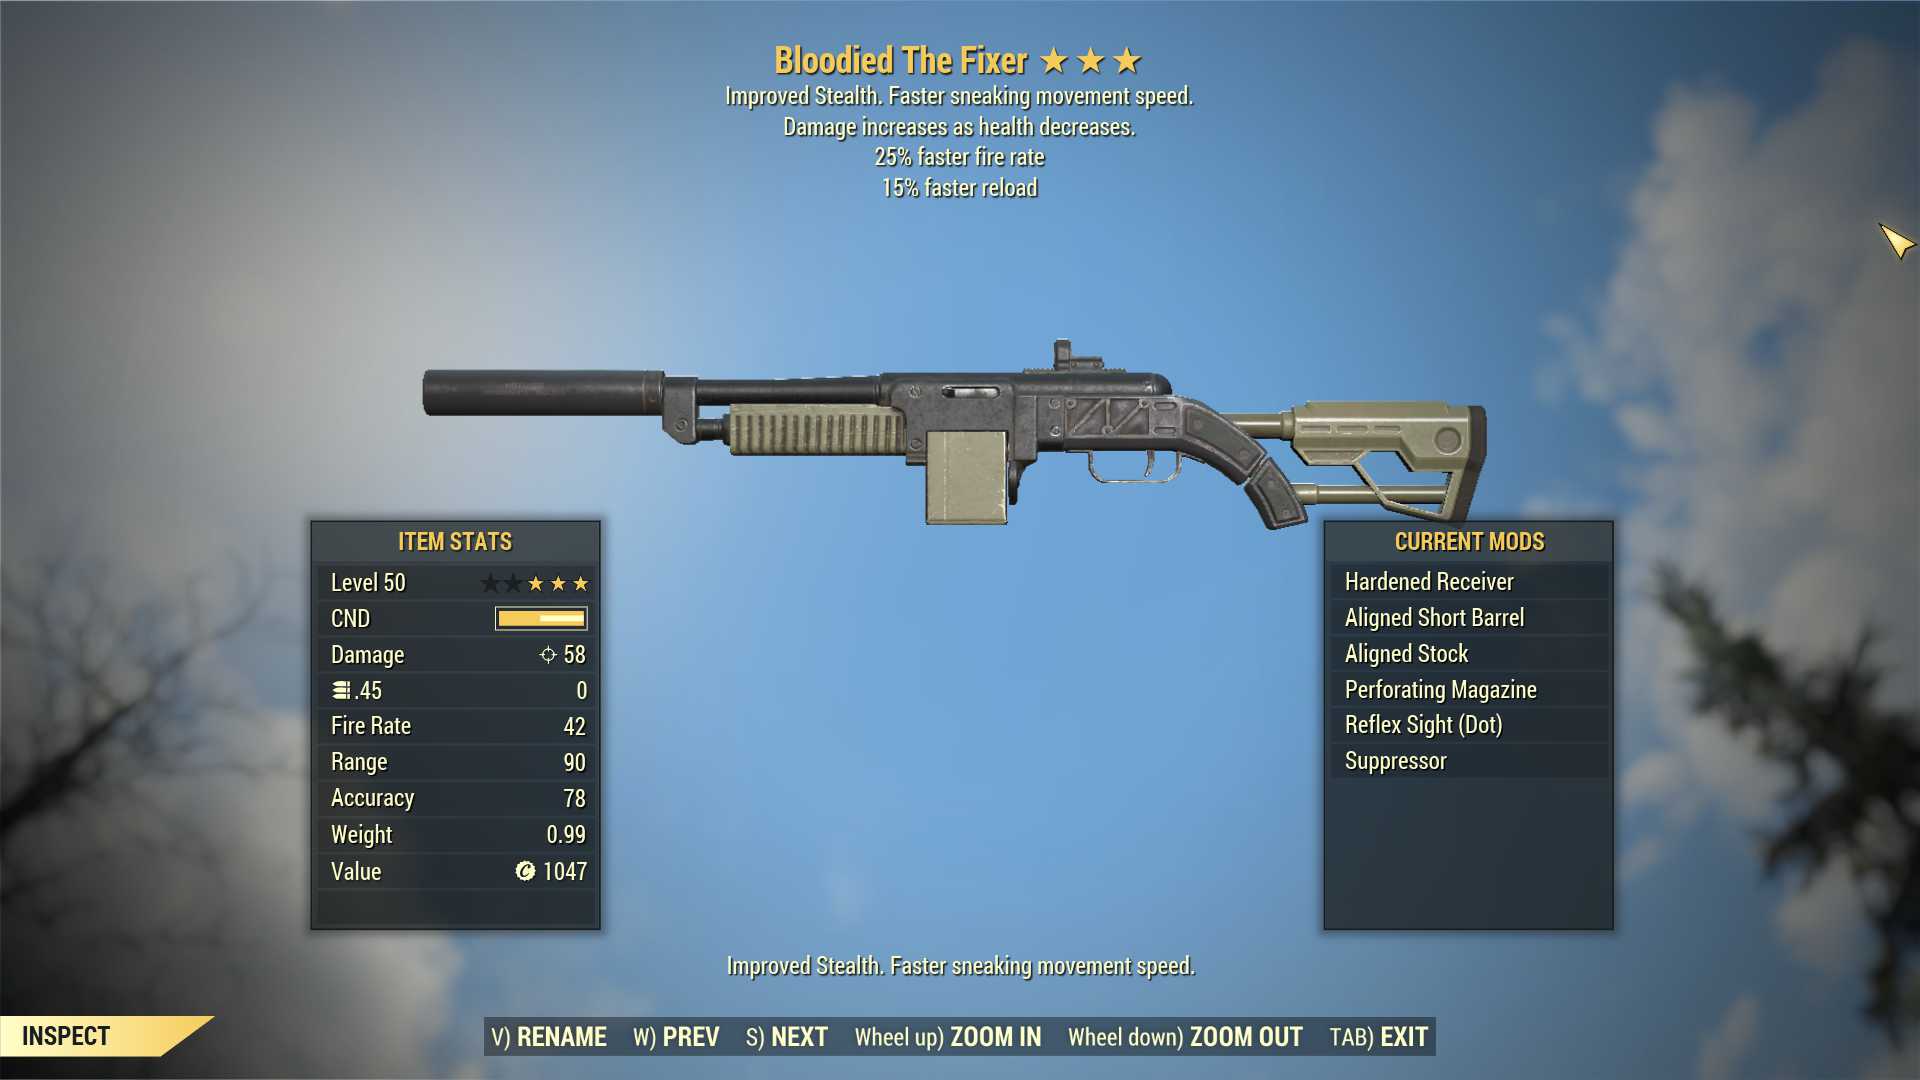 Bloodied The Fixer (25% faster fire rate, 15% faster reload)